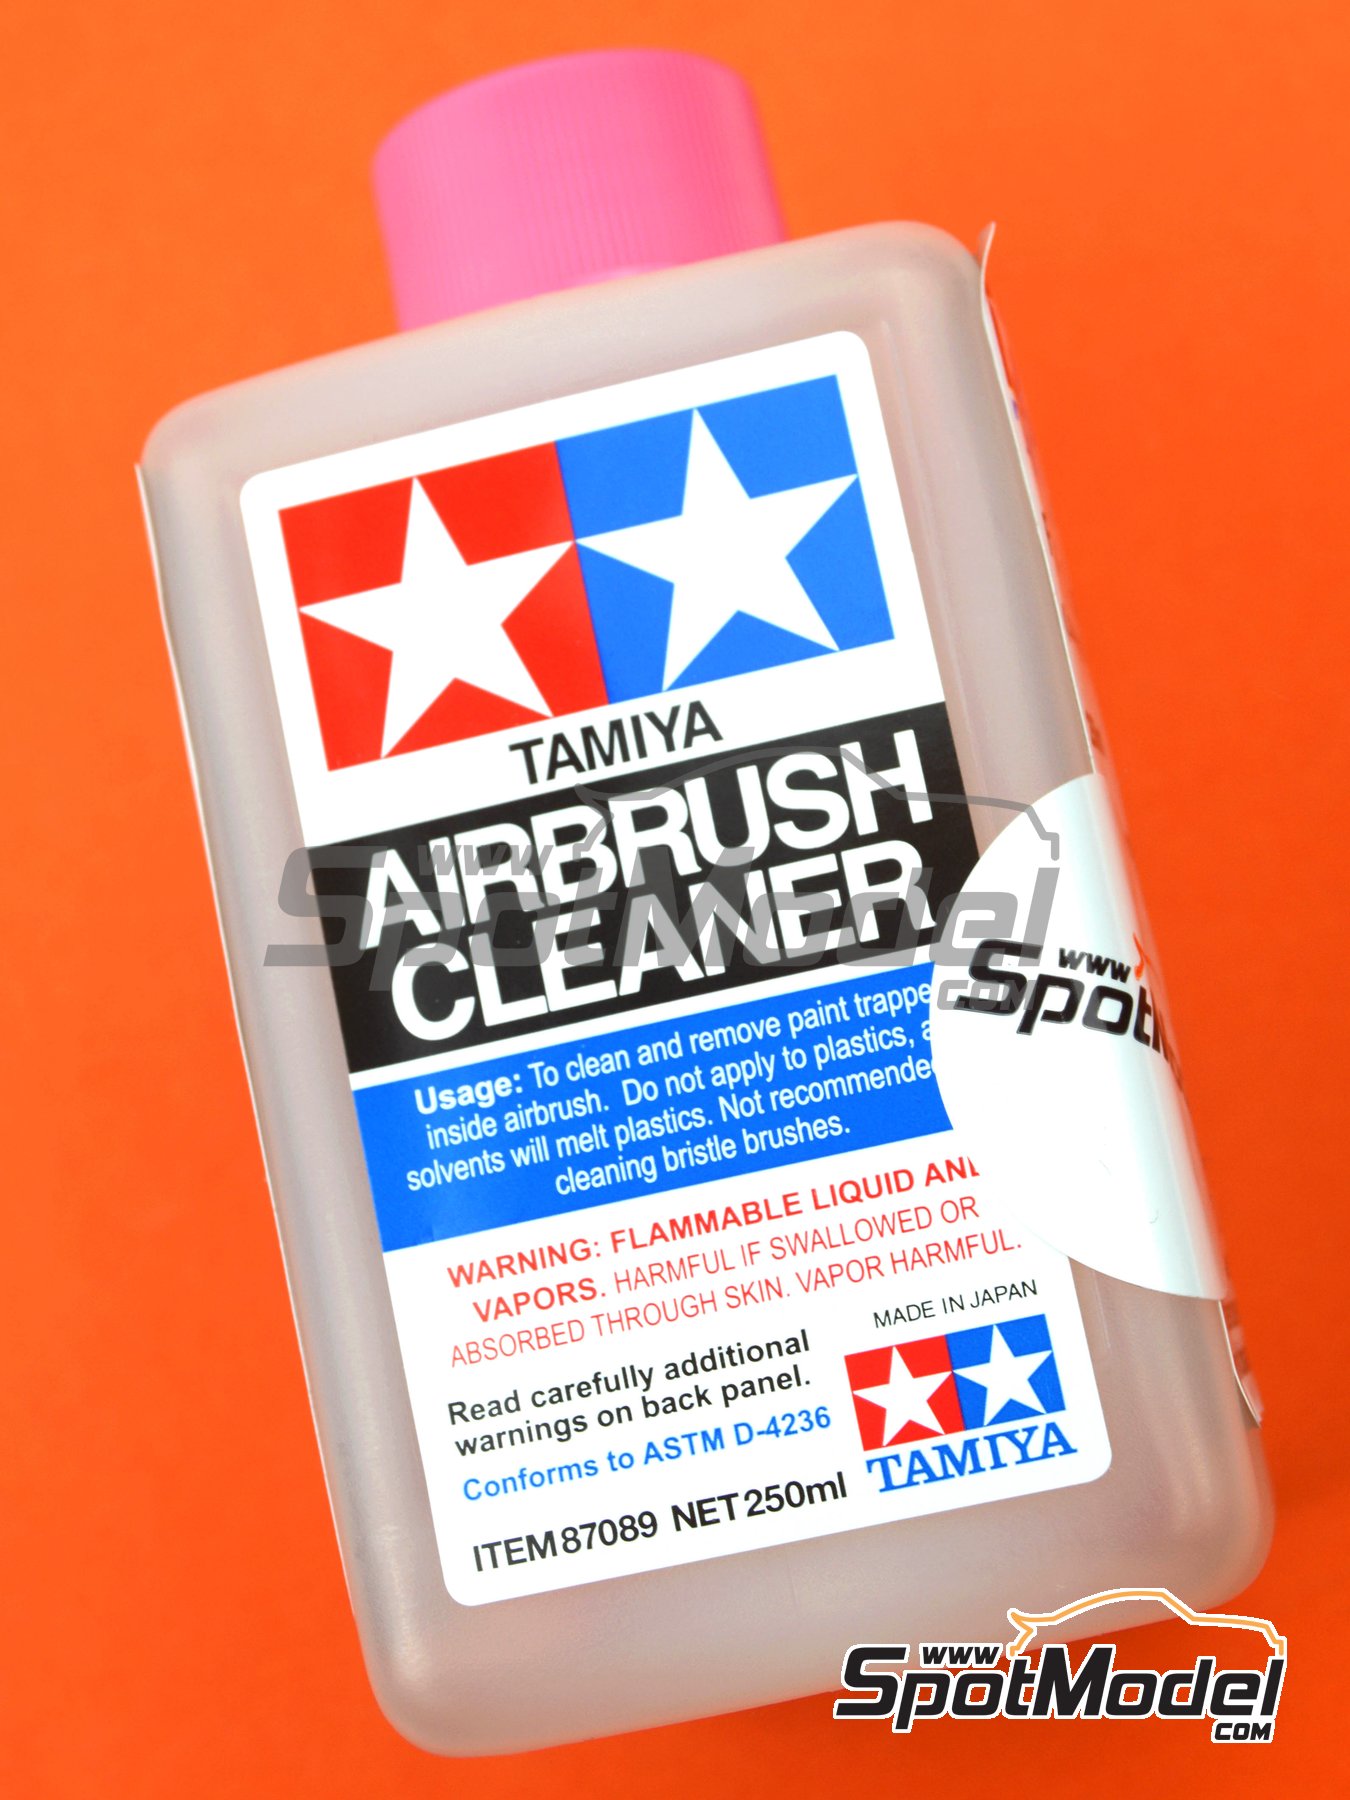 I saw a video from a r claiming Tamiya Airbrush Cleaner and